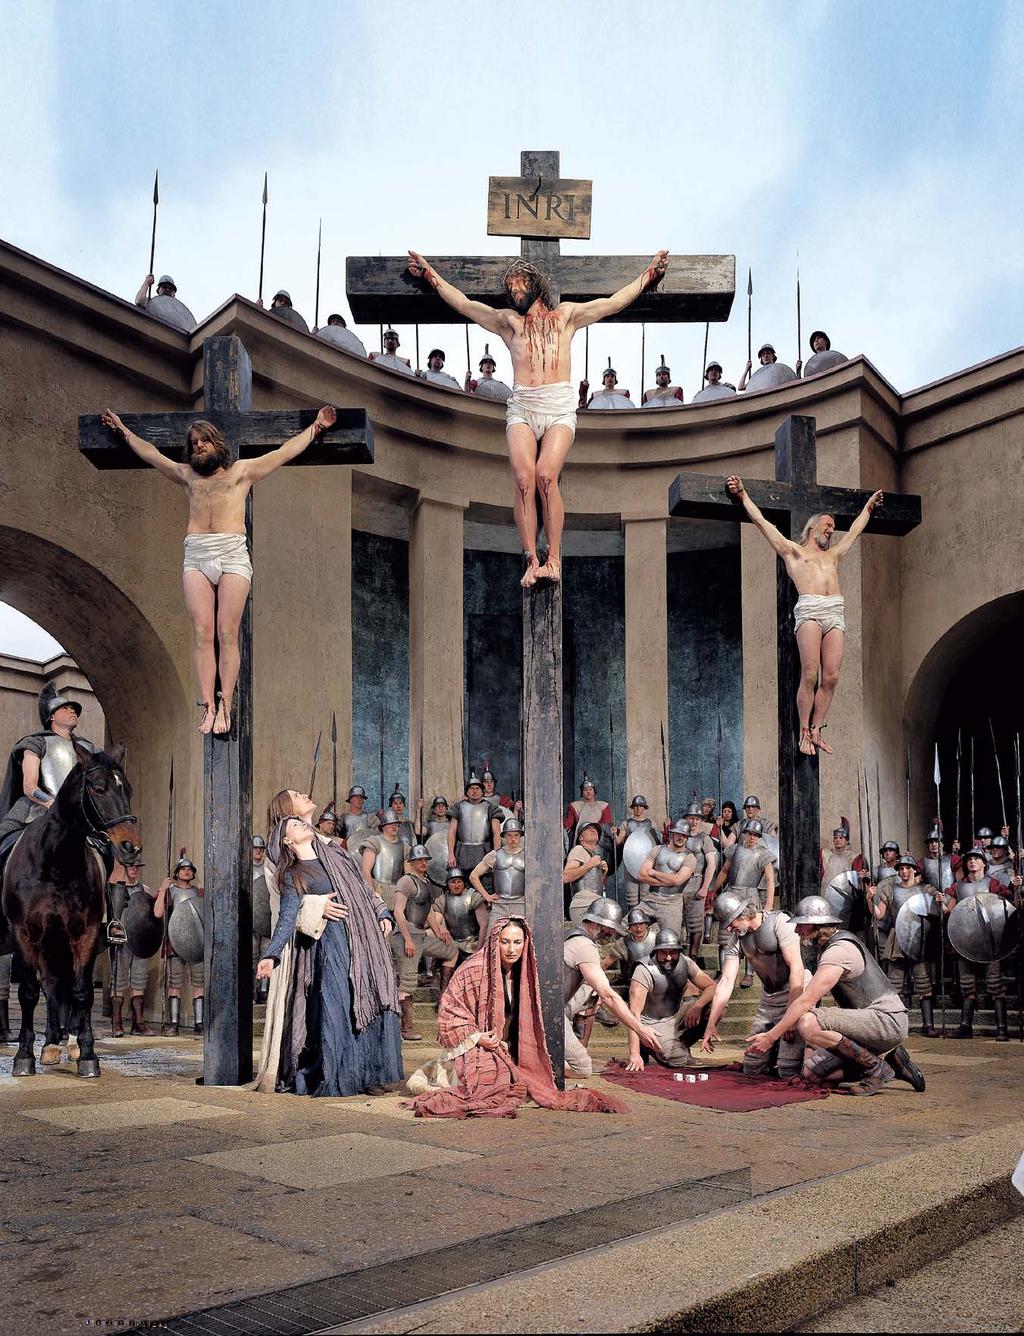 Deposit fullyrefundable before 31st January 2019 See inside for details Oberammergau Passion Play 16 May to 4 October 2020 Fully escorted tours combined with